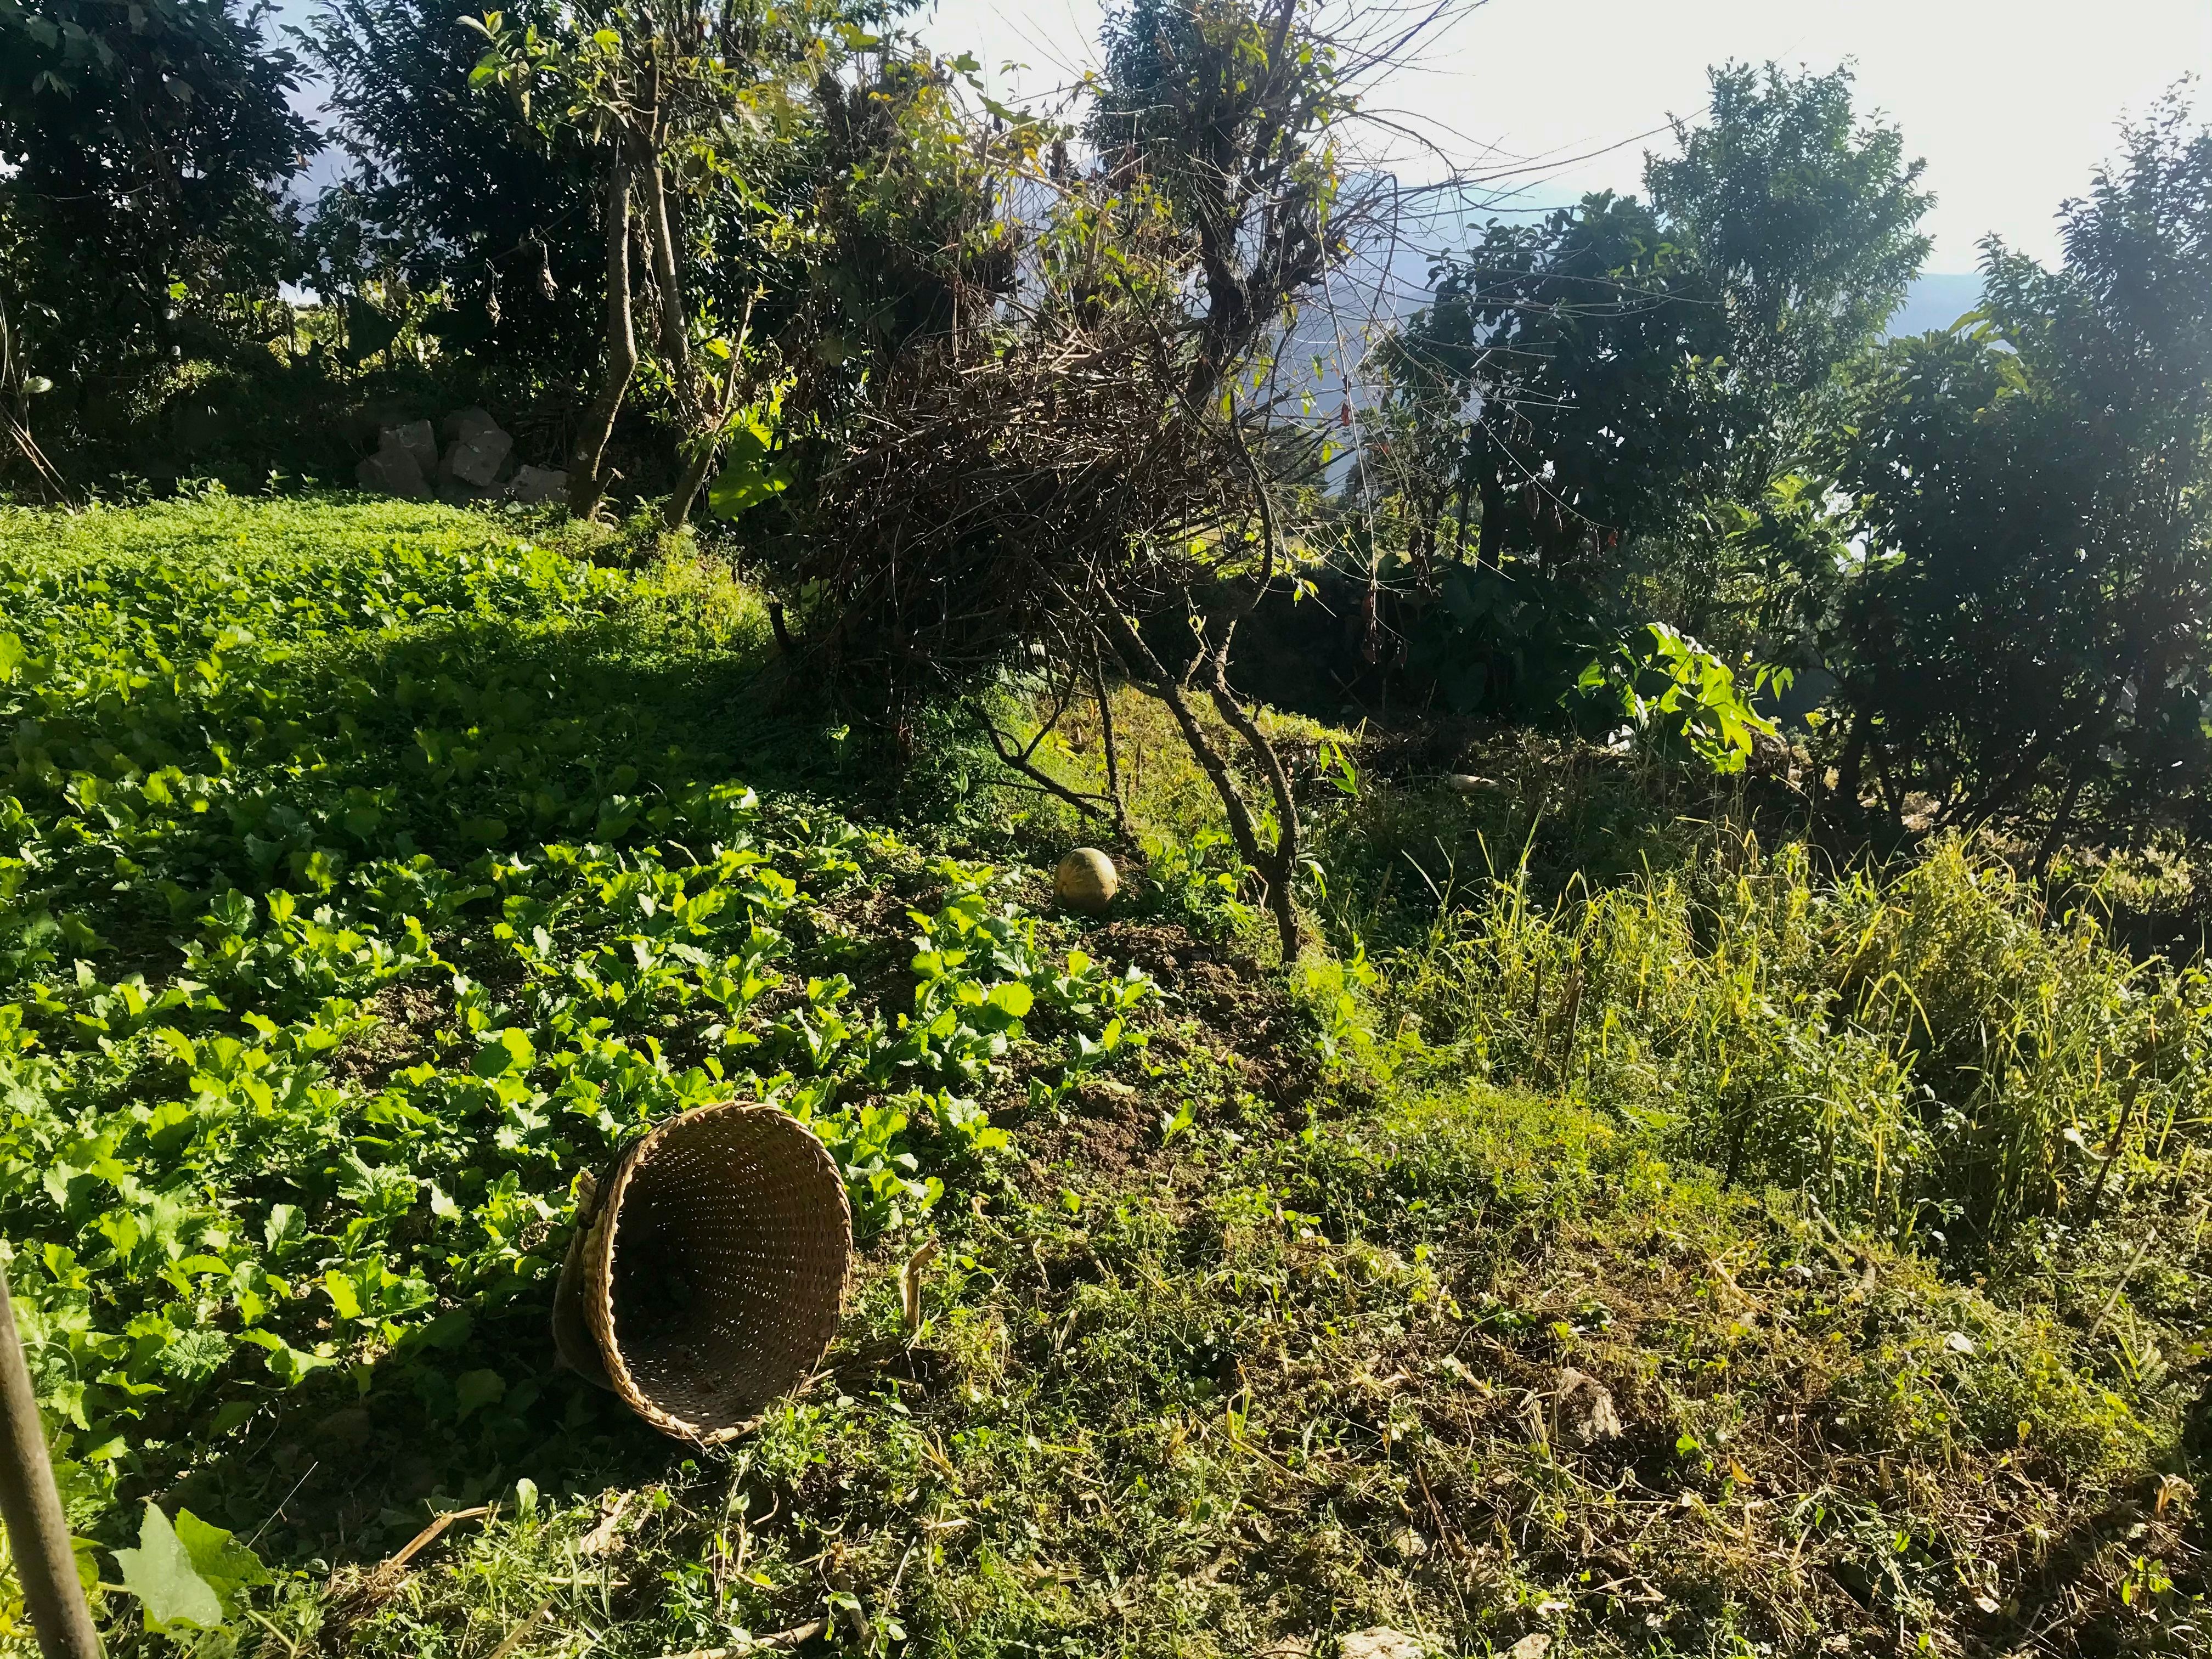 a bamboo basket laying around in a lettuce field